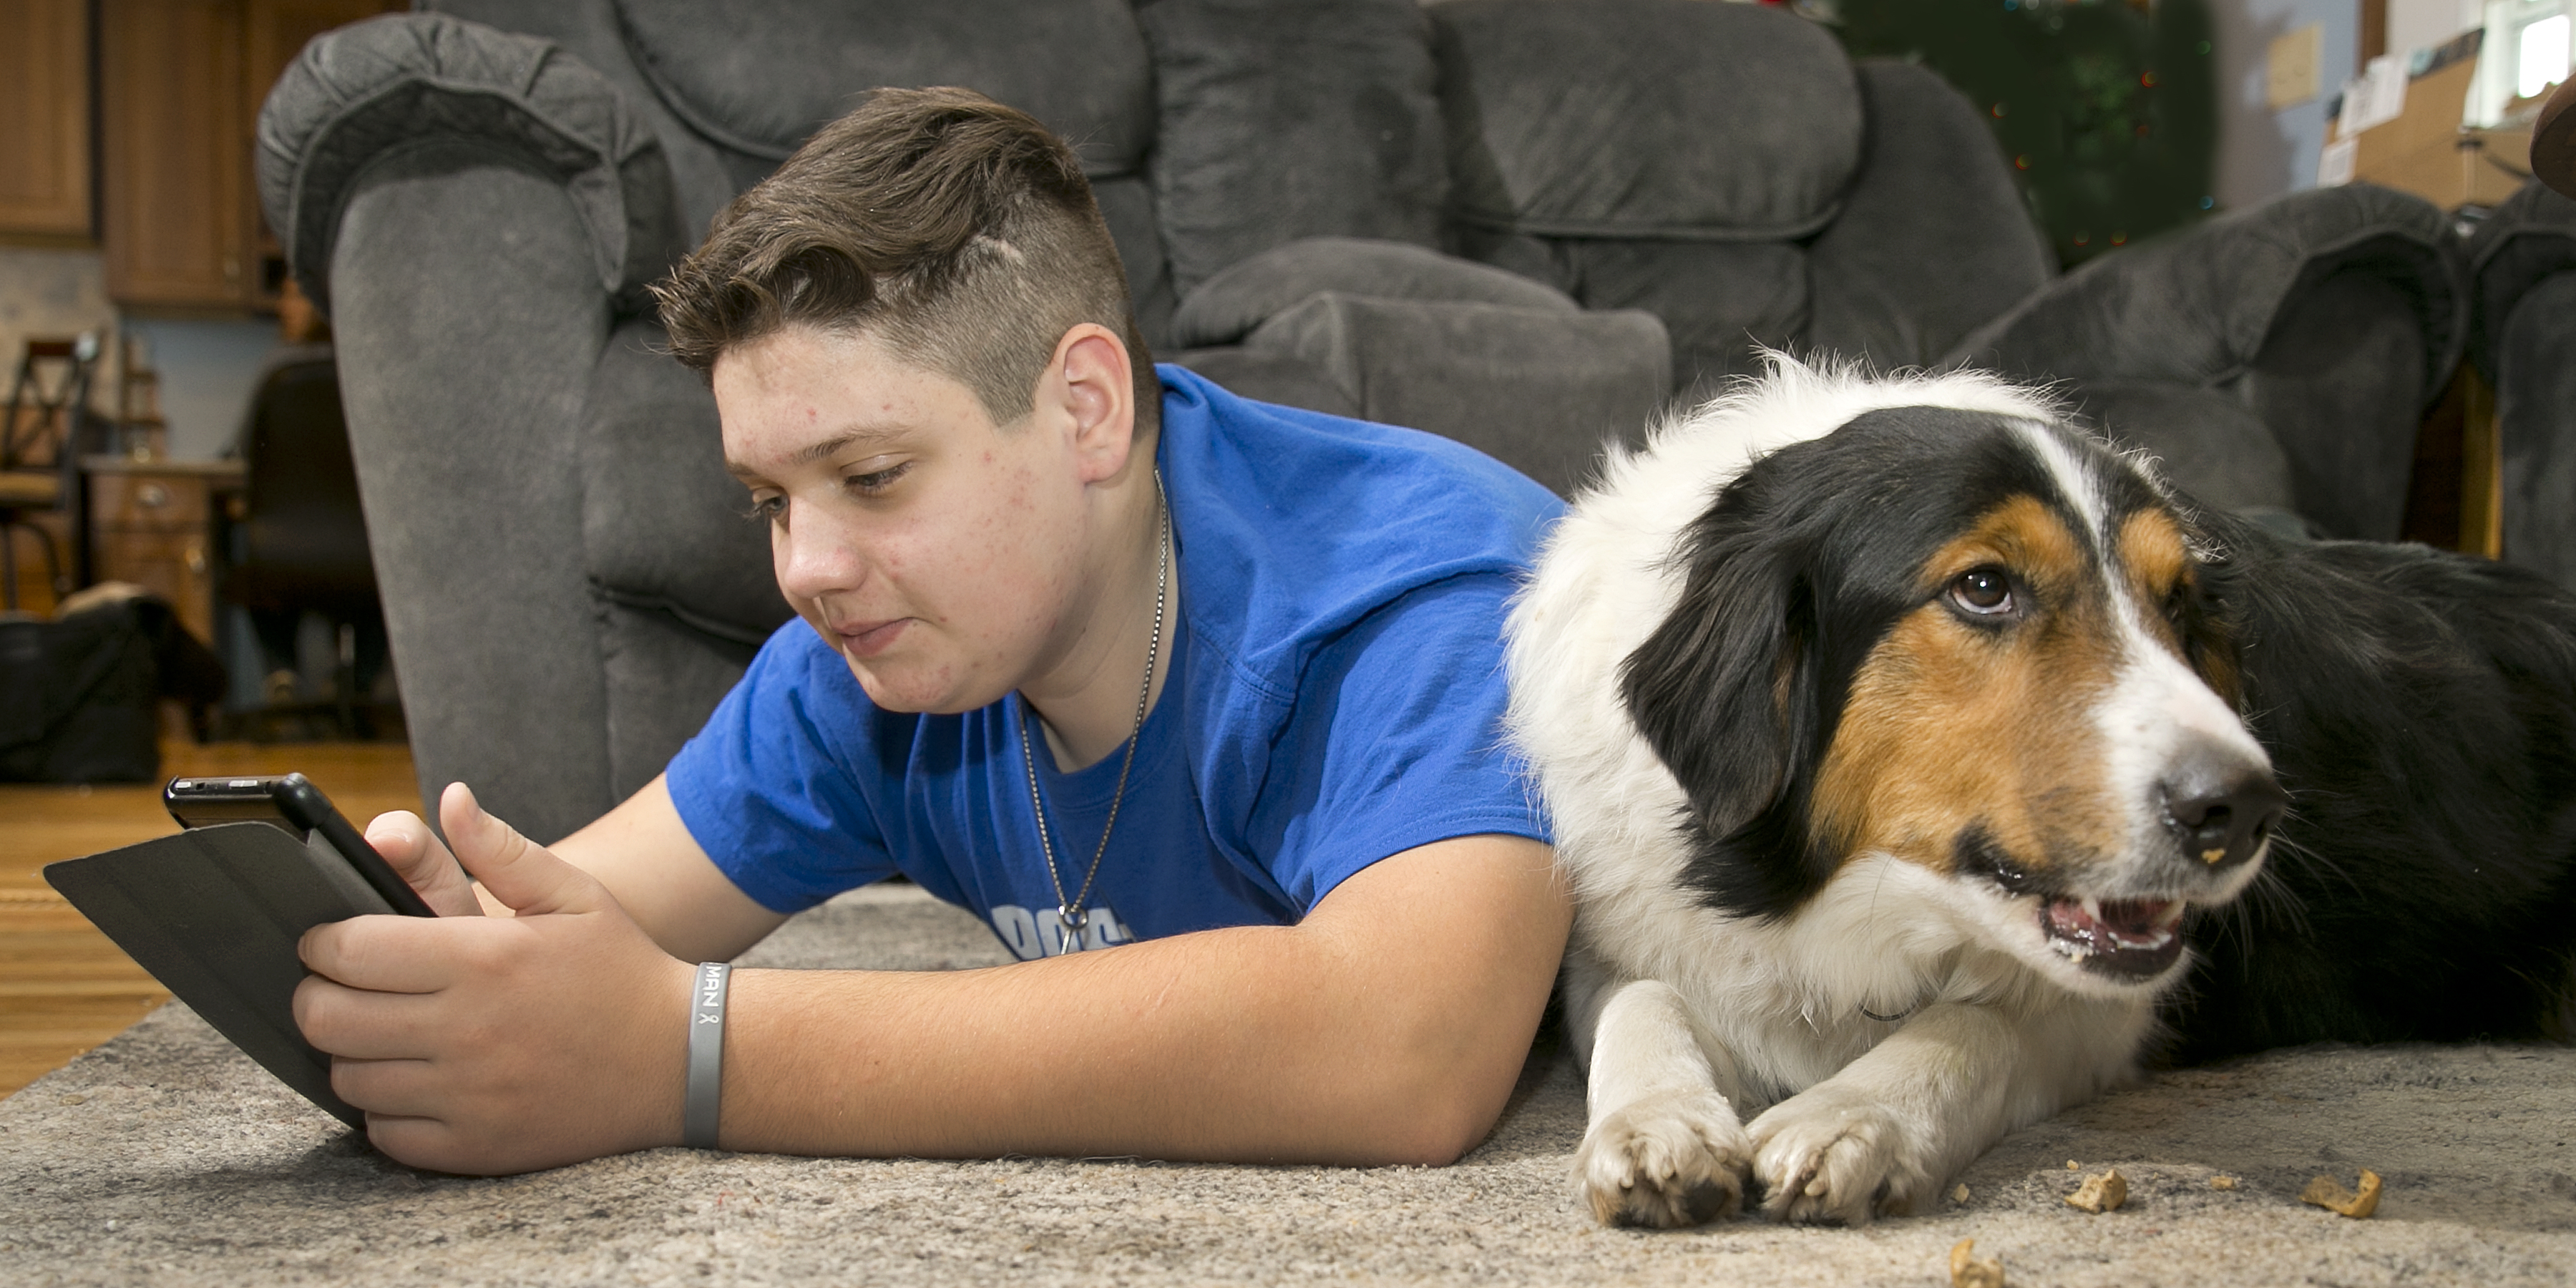 Boy interacts with his mobile phone while lying next to his dog on his living room floor